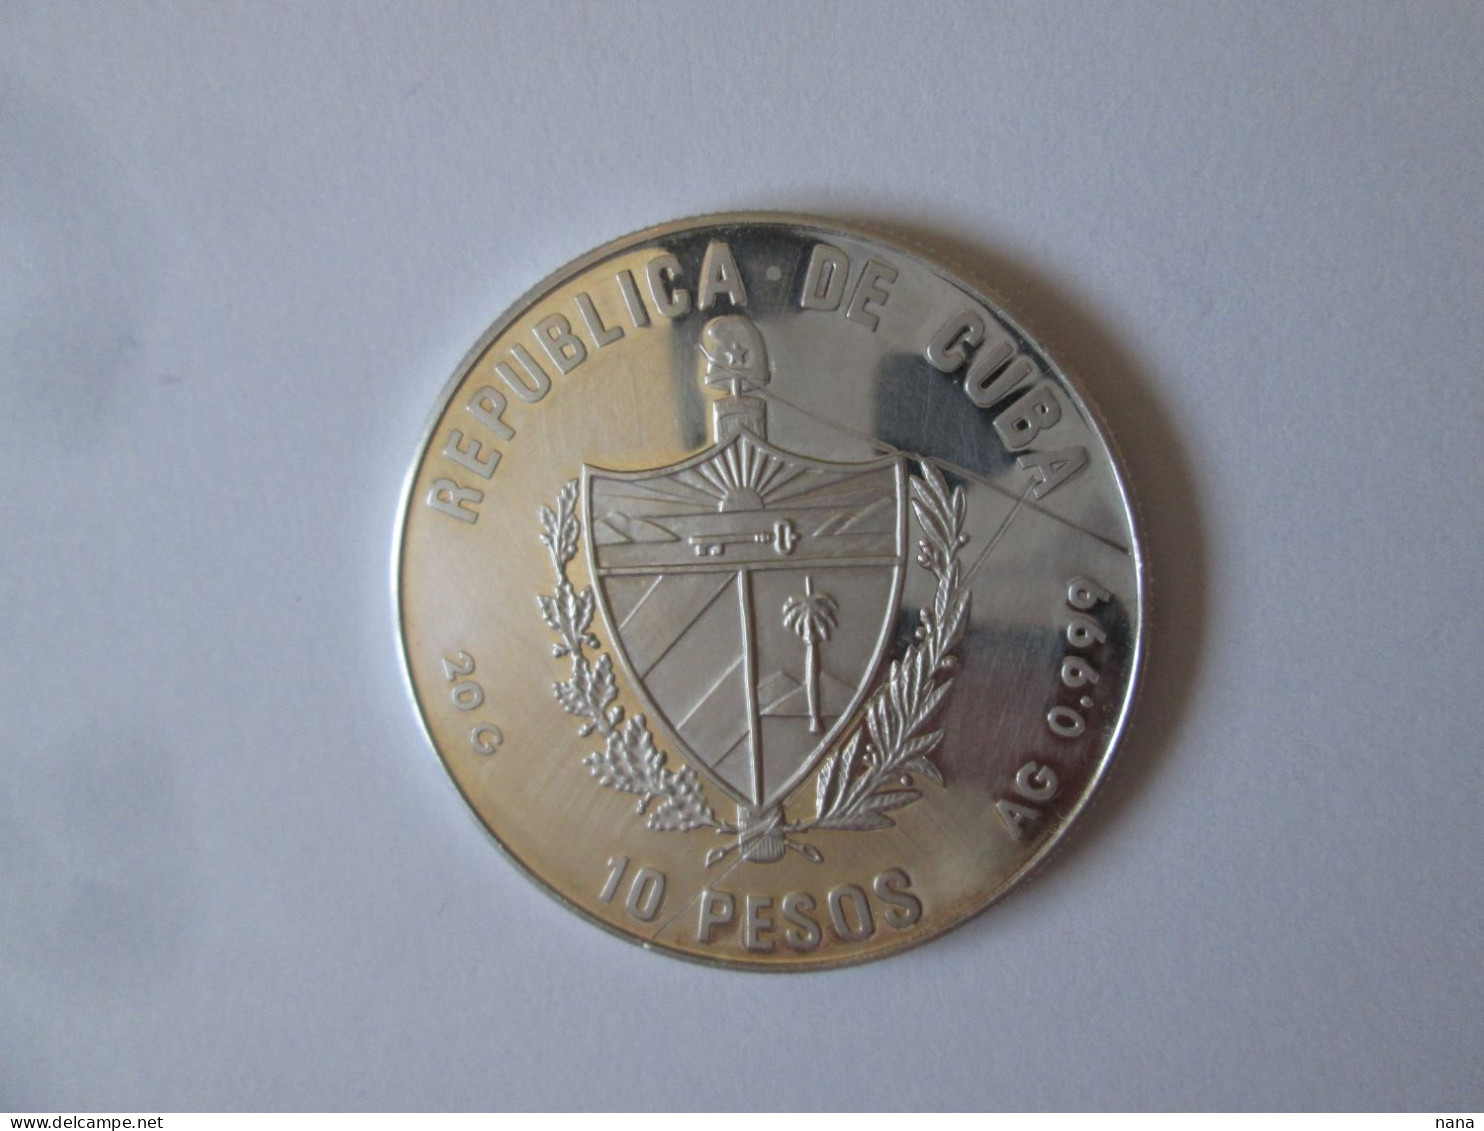 Rare! Cuba 10 Pesos 1990 Proof Silver/Argent.999 Commemorative Coin Limited Edition:The First Voyage Of Columbus - Cuba